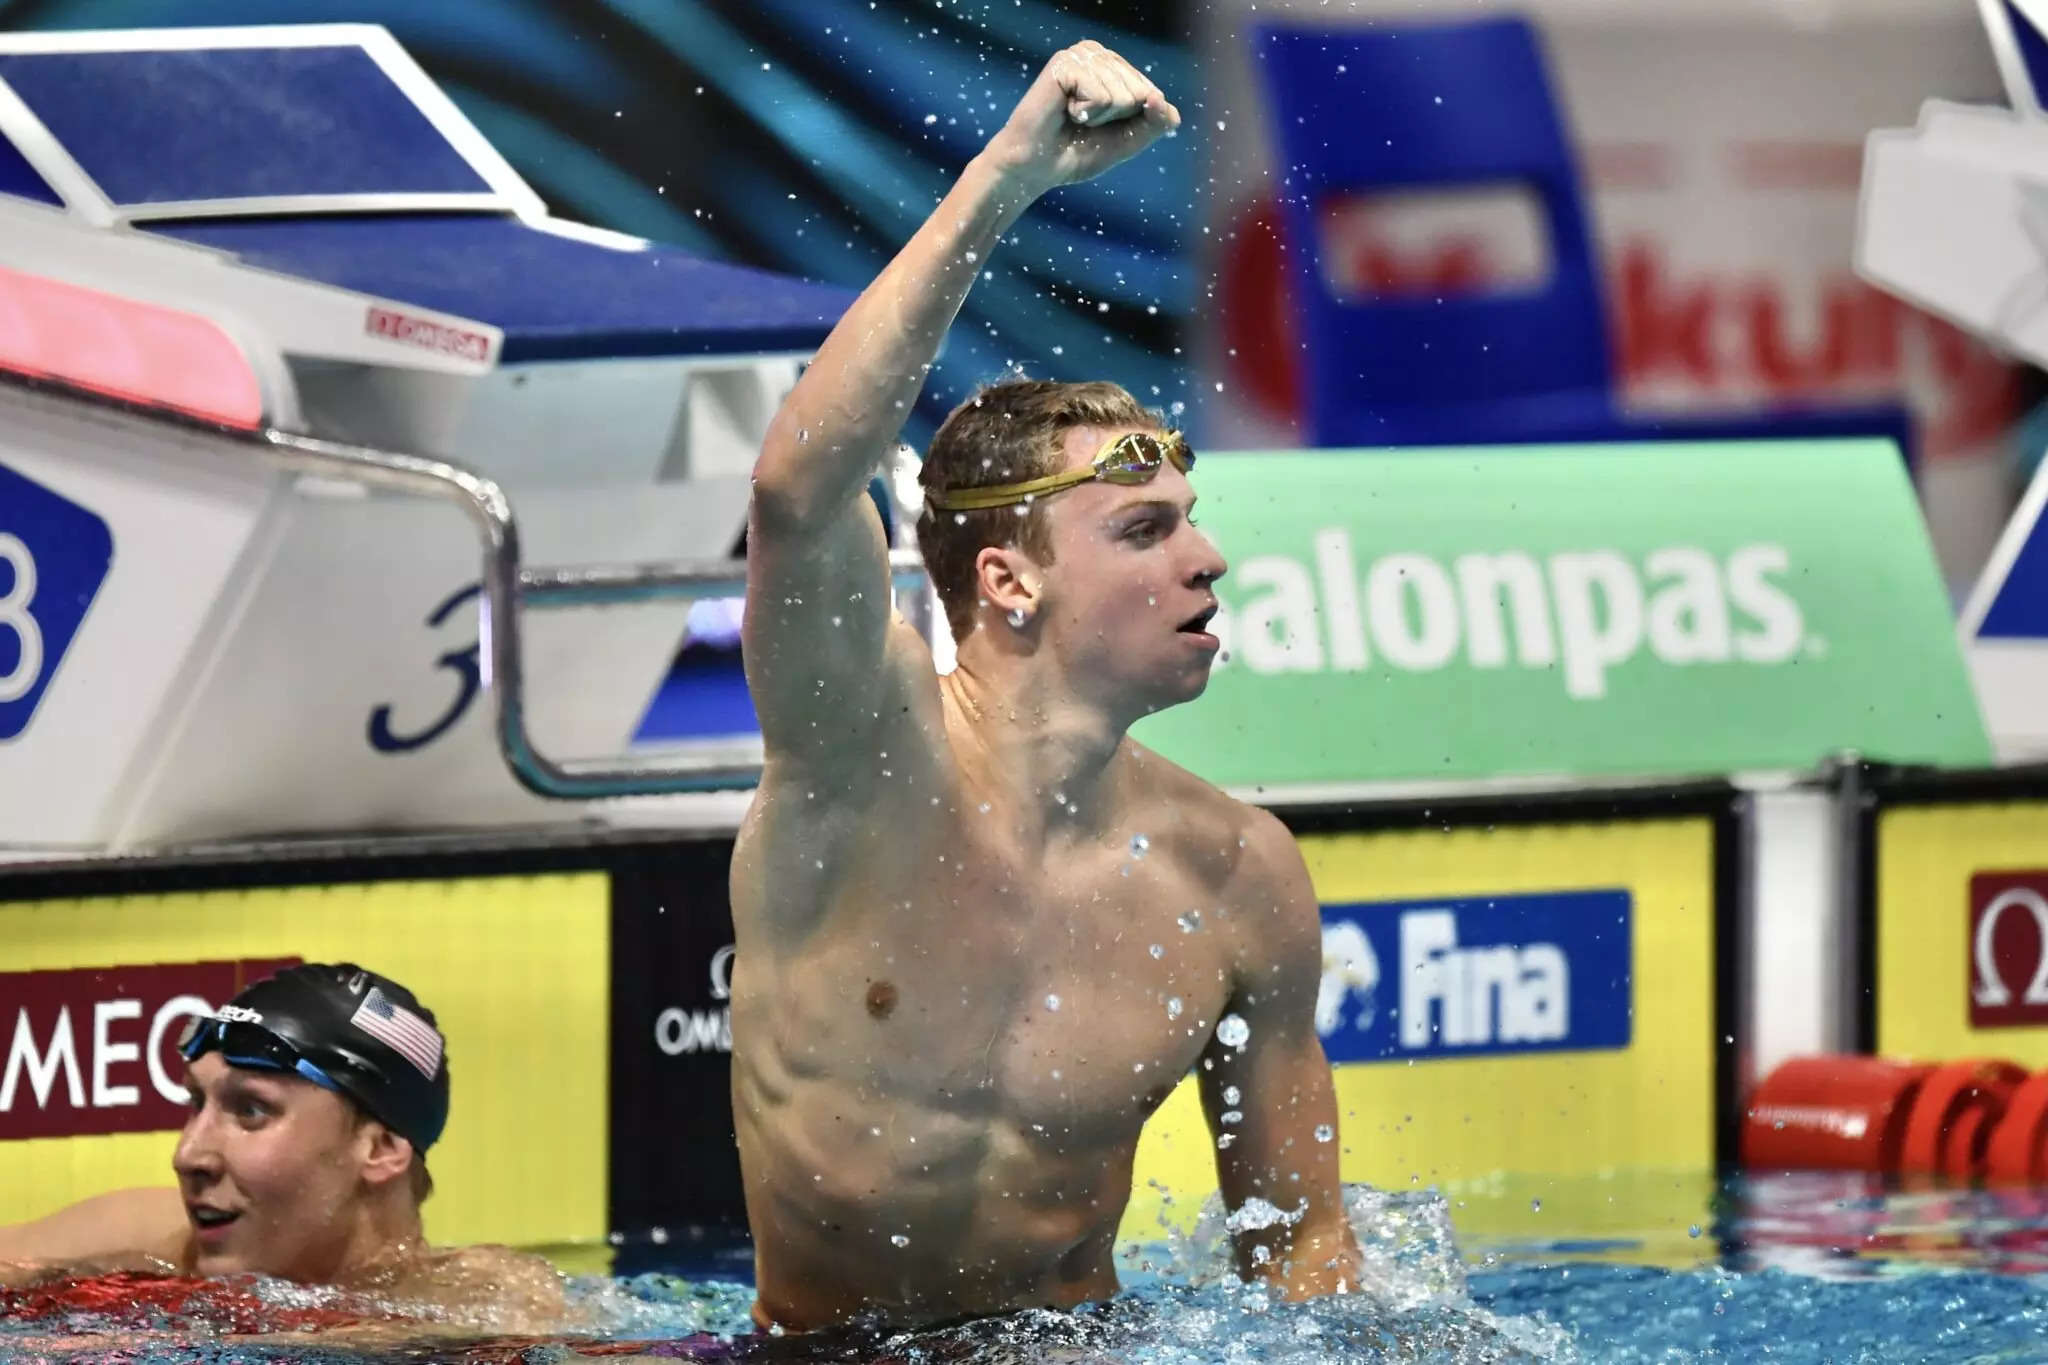 Who is Leon Marchand? French swimmer who shatters most decorated Olympics athlete Michael Phelps' individual world record